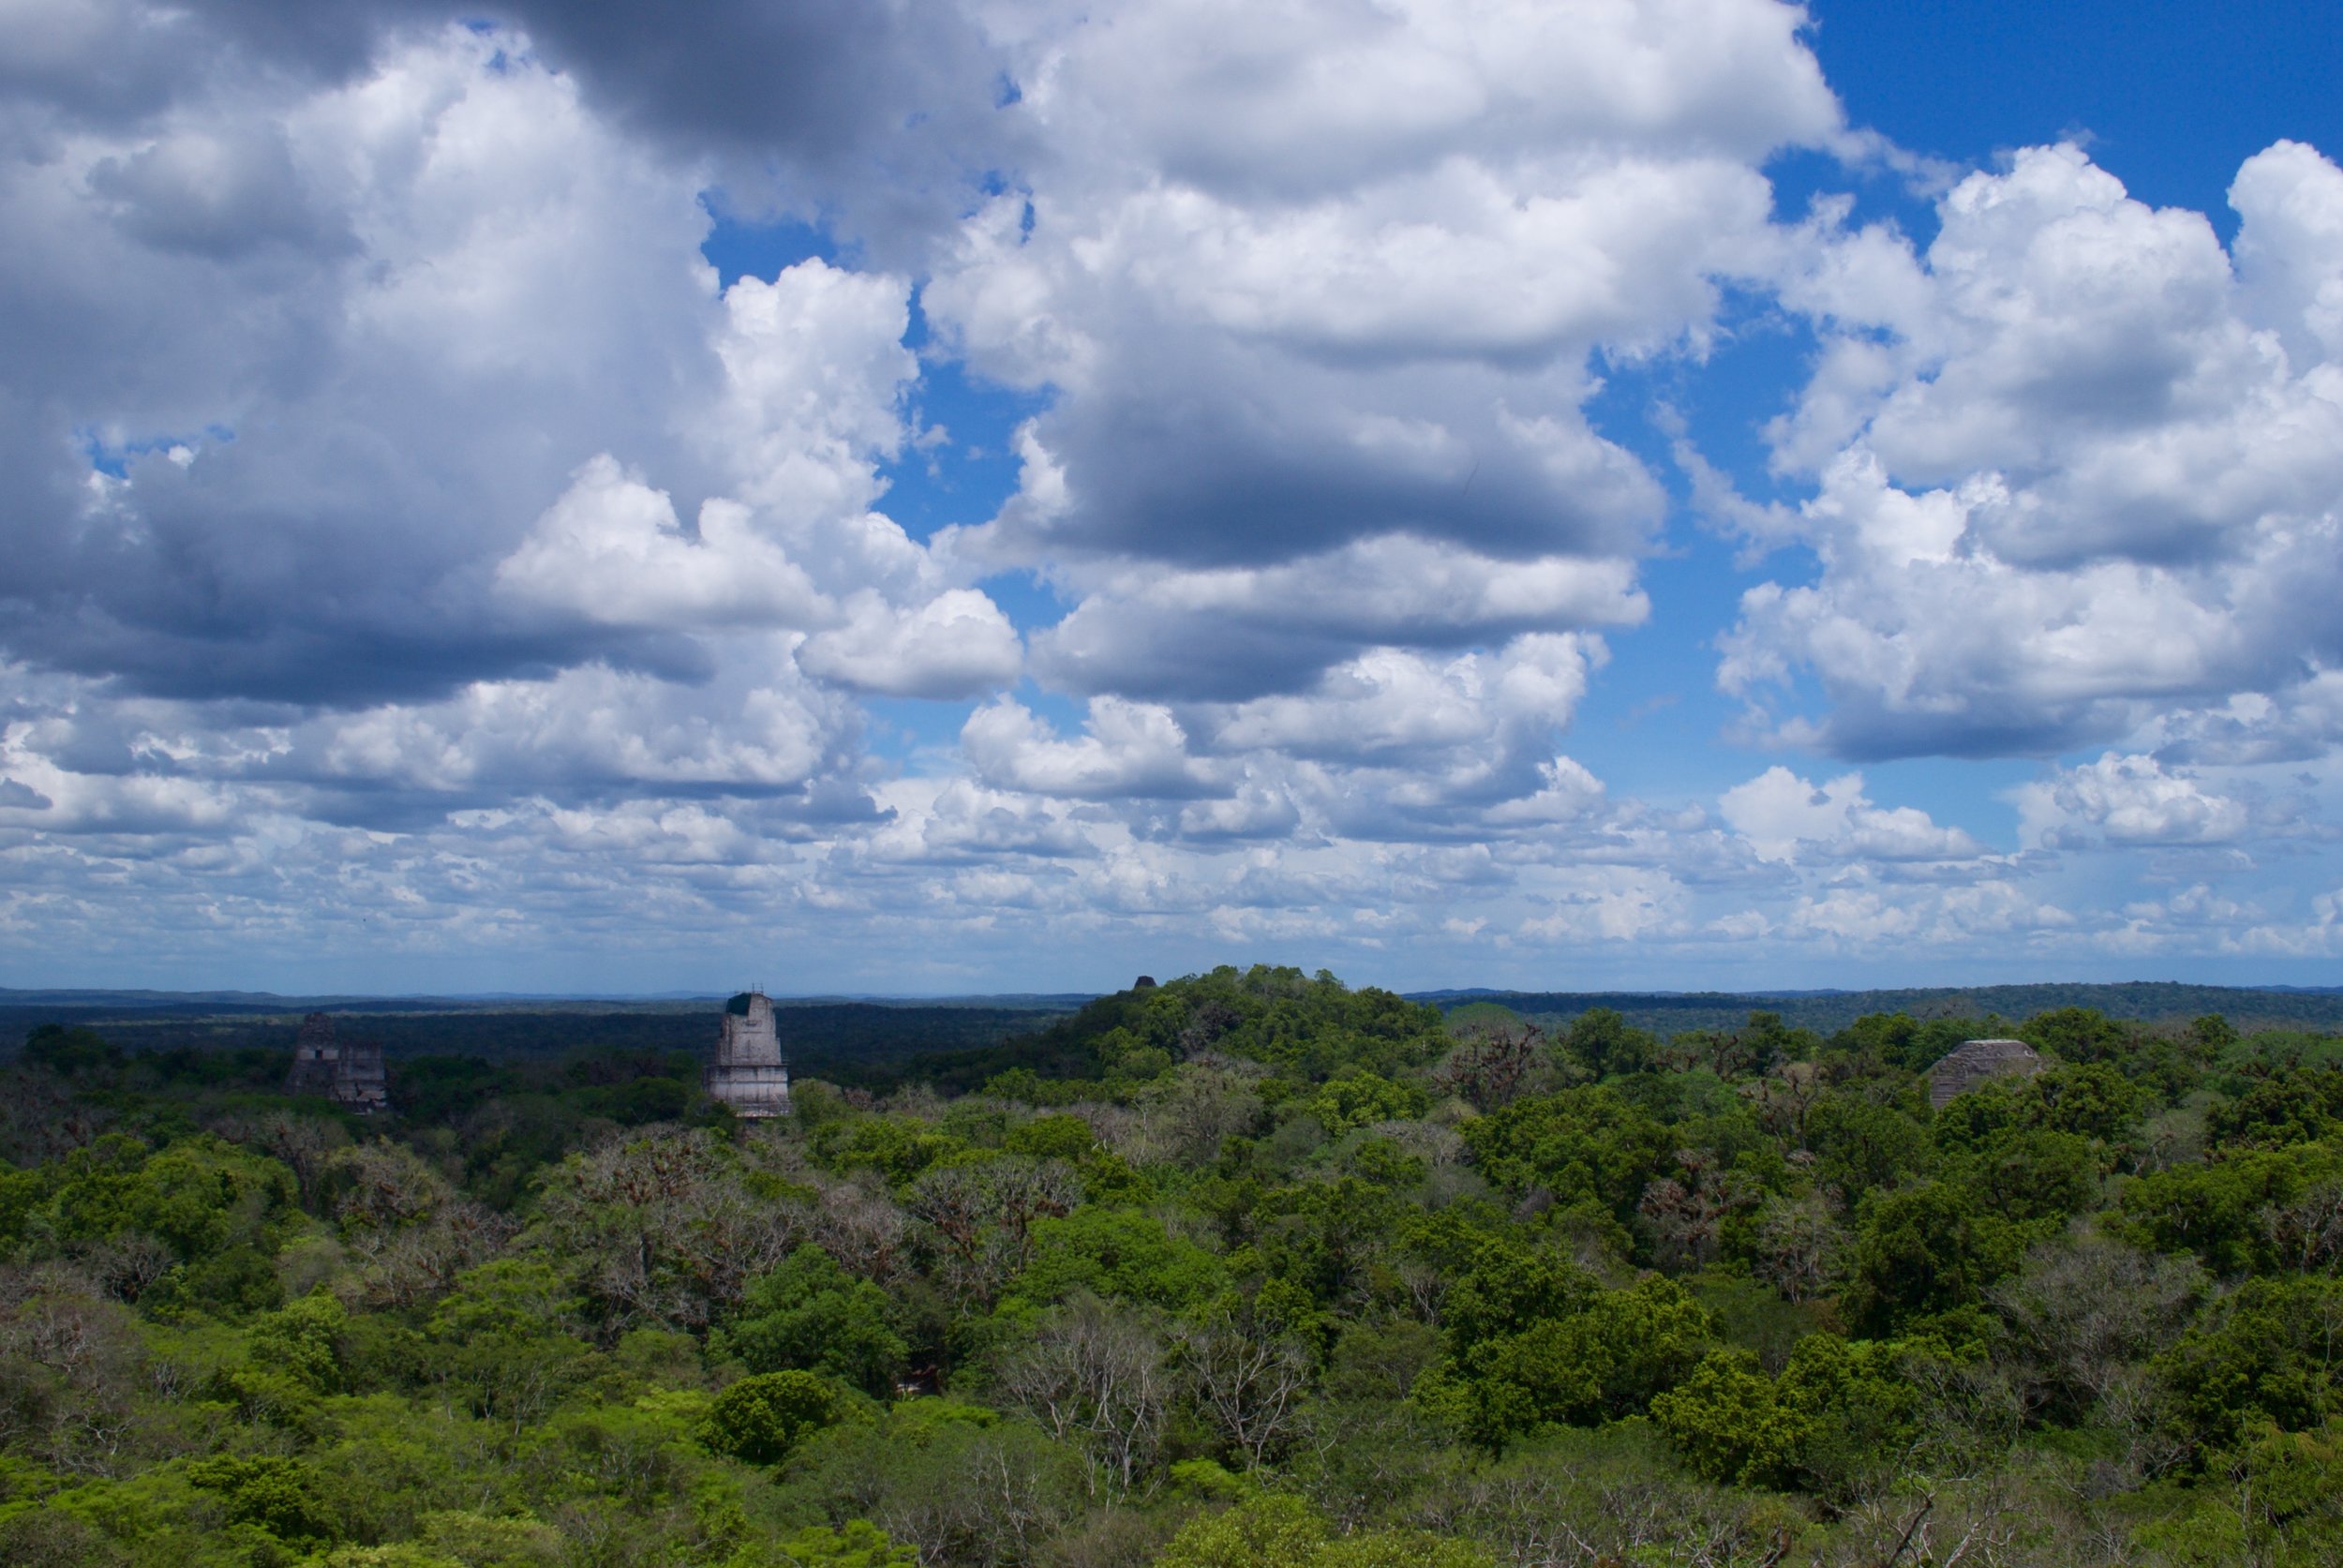 Spend all day at Tikal, having a picnic lunch and climbing to the top of the temples for a great view